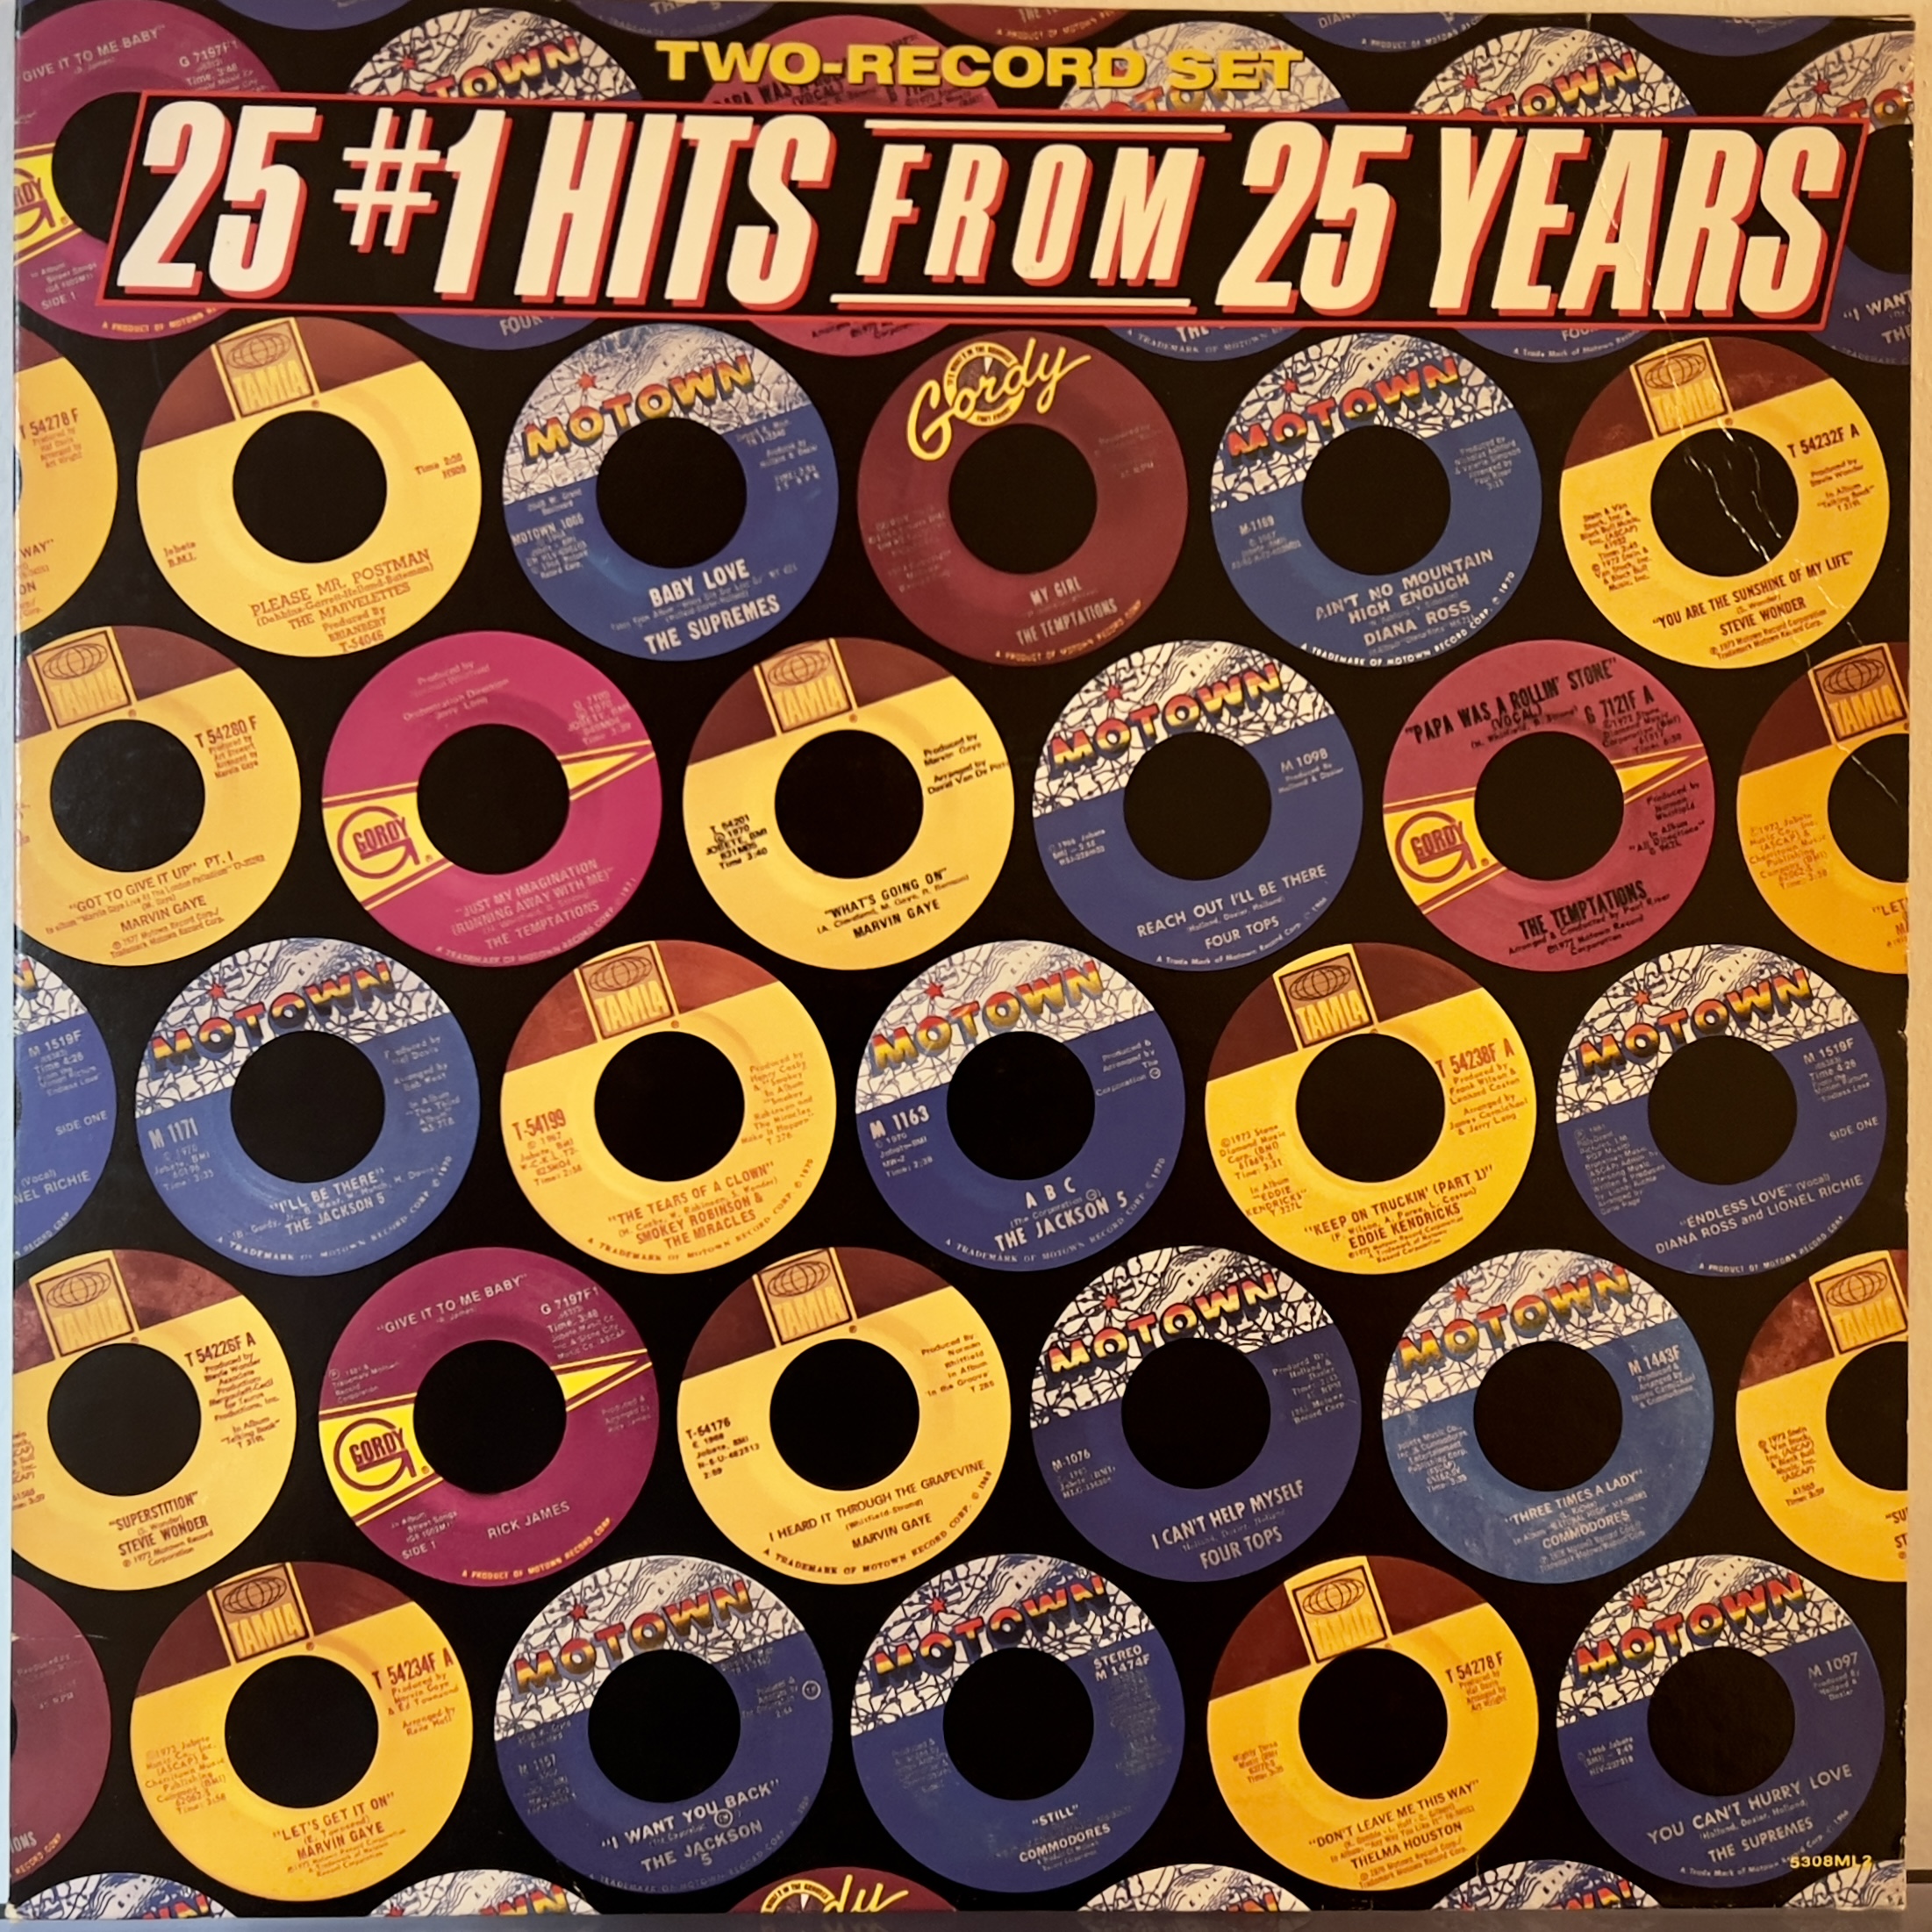 25 #1 Hits From 25 Years